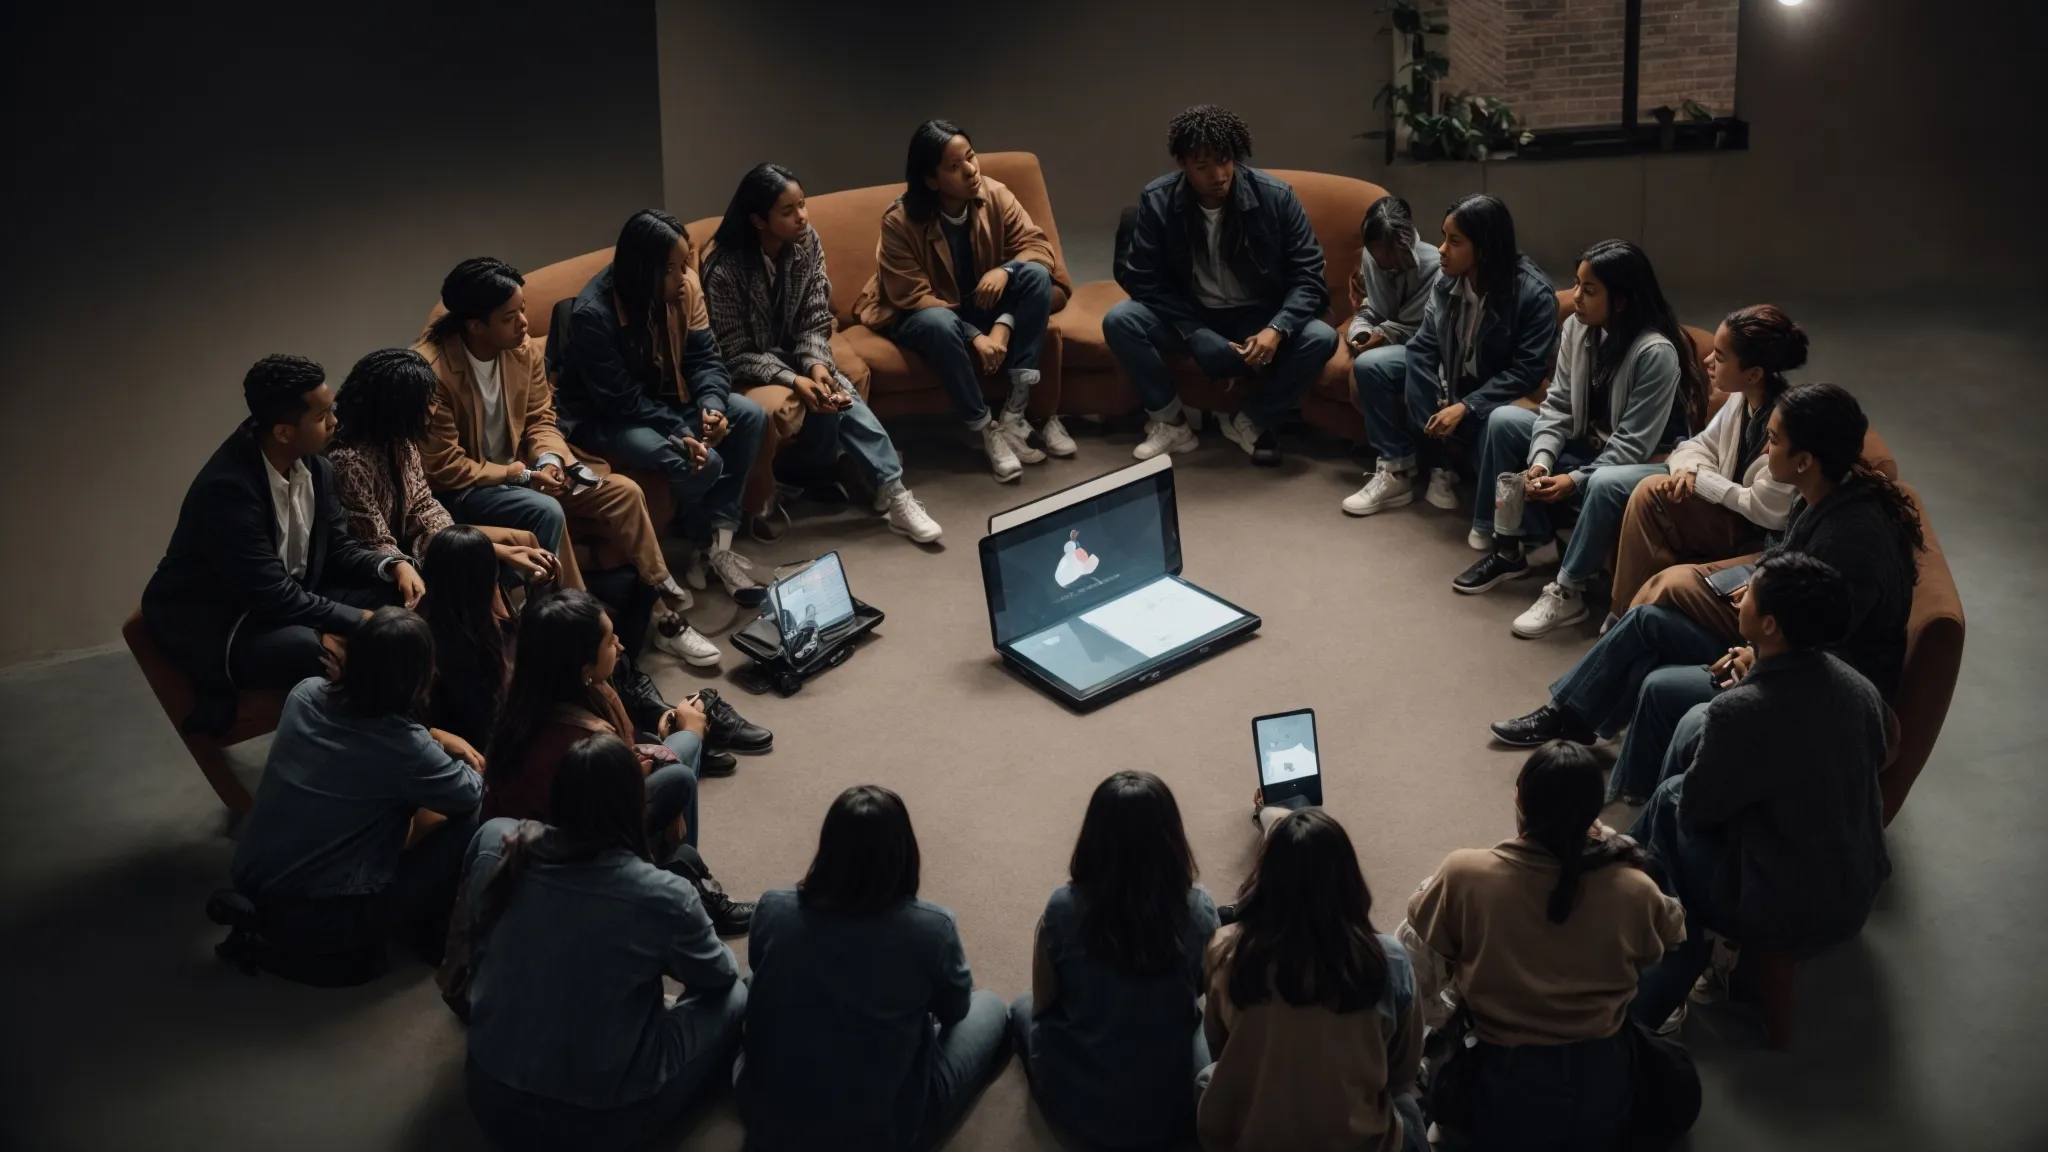 a group of diverse individuals sits in a circle, engaged in an animated discussion with a digital tablet in the center.